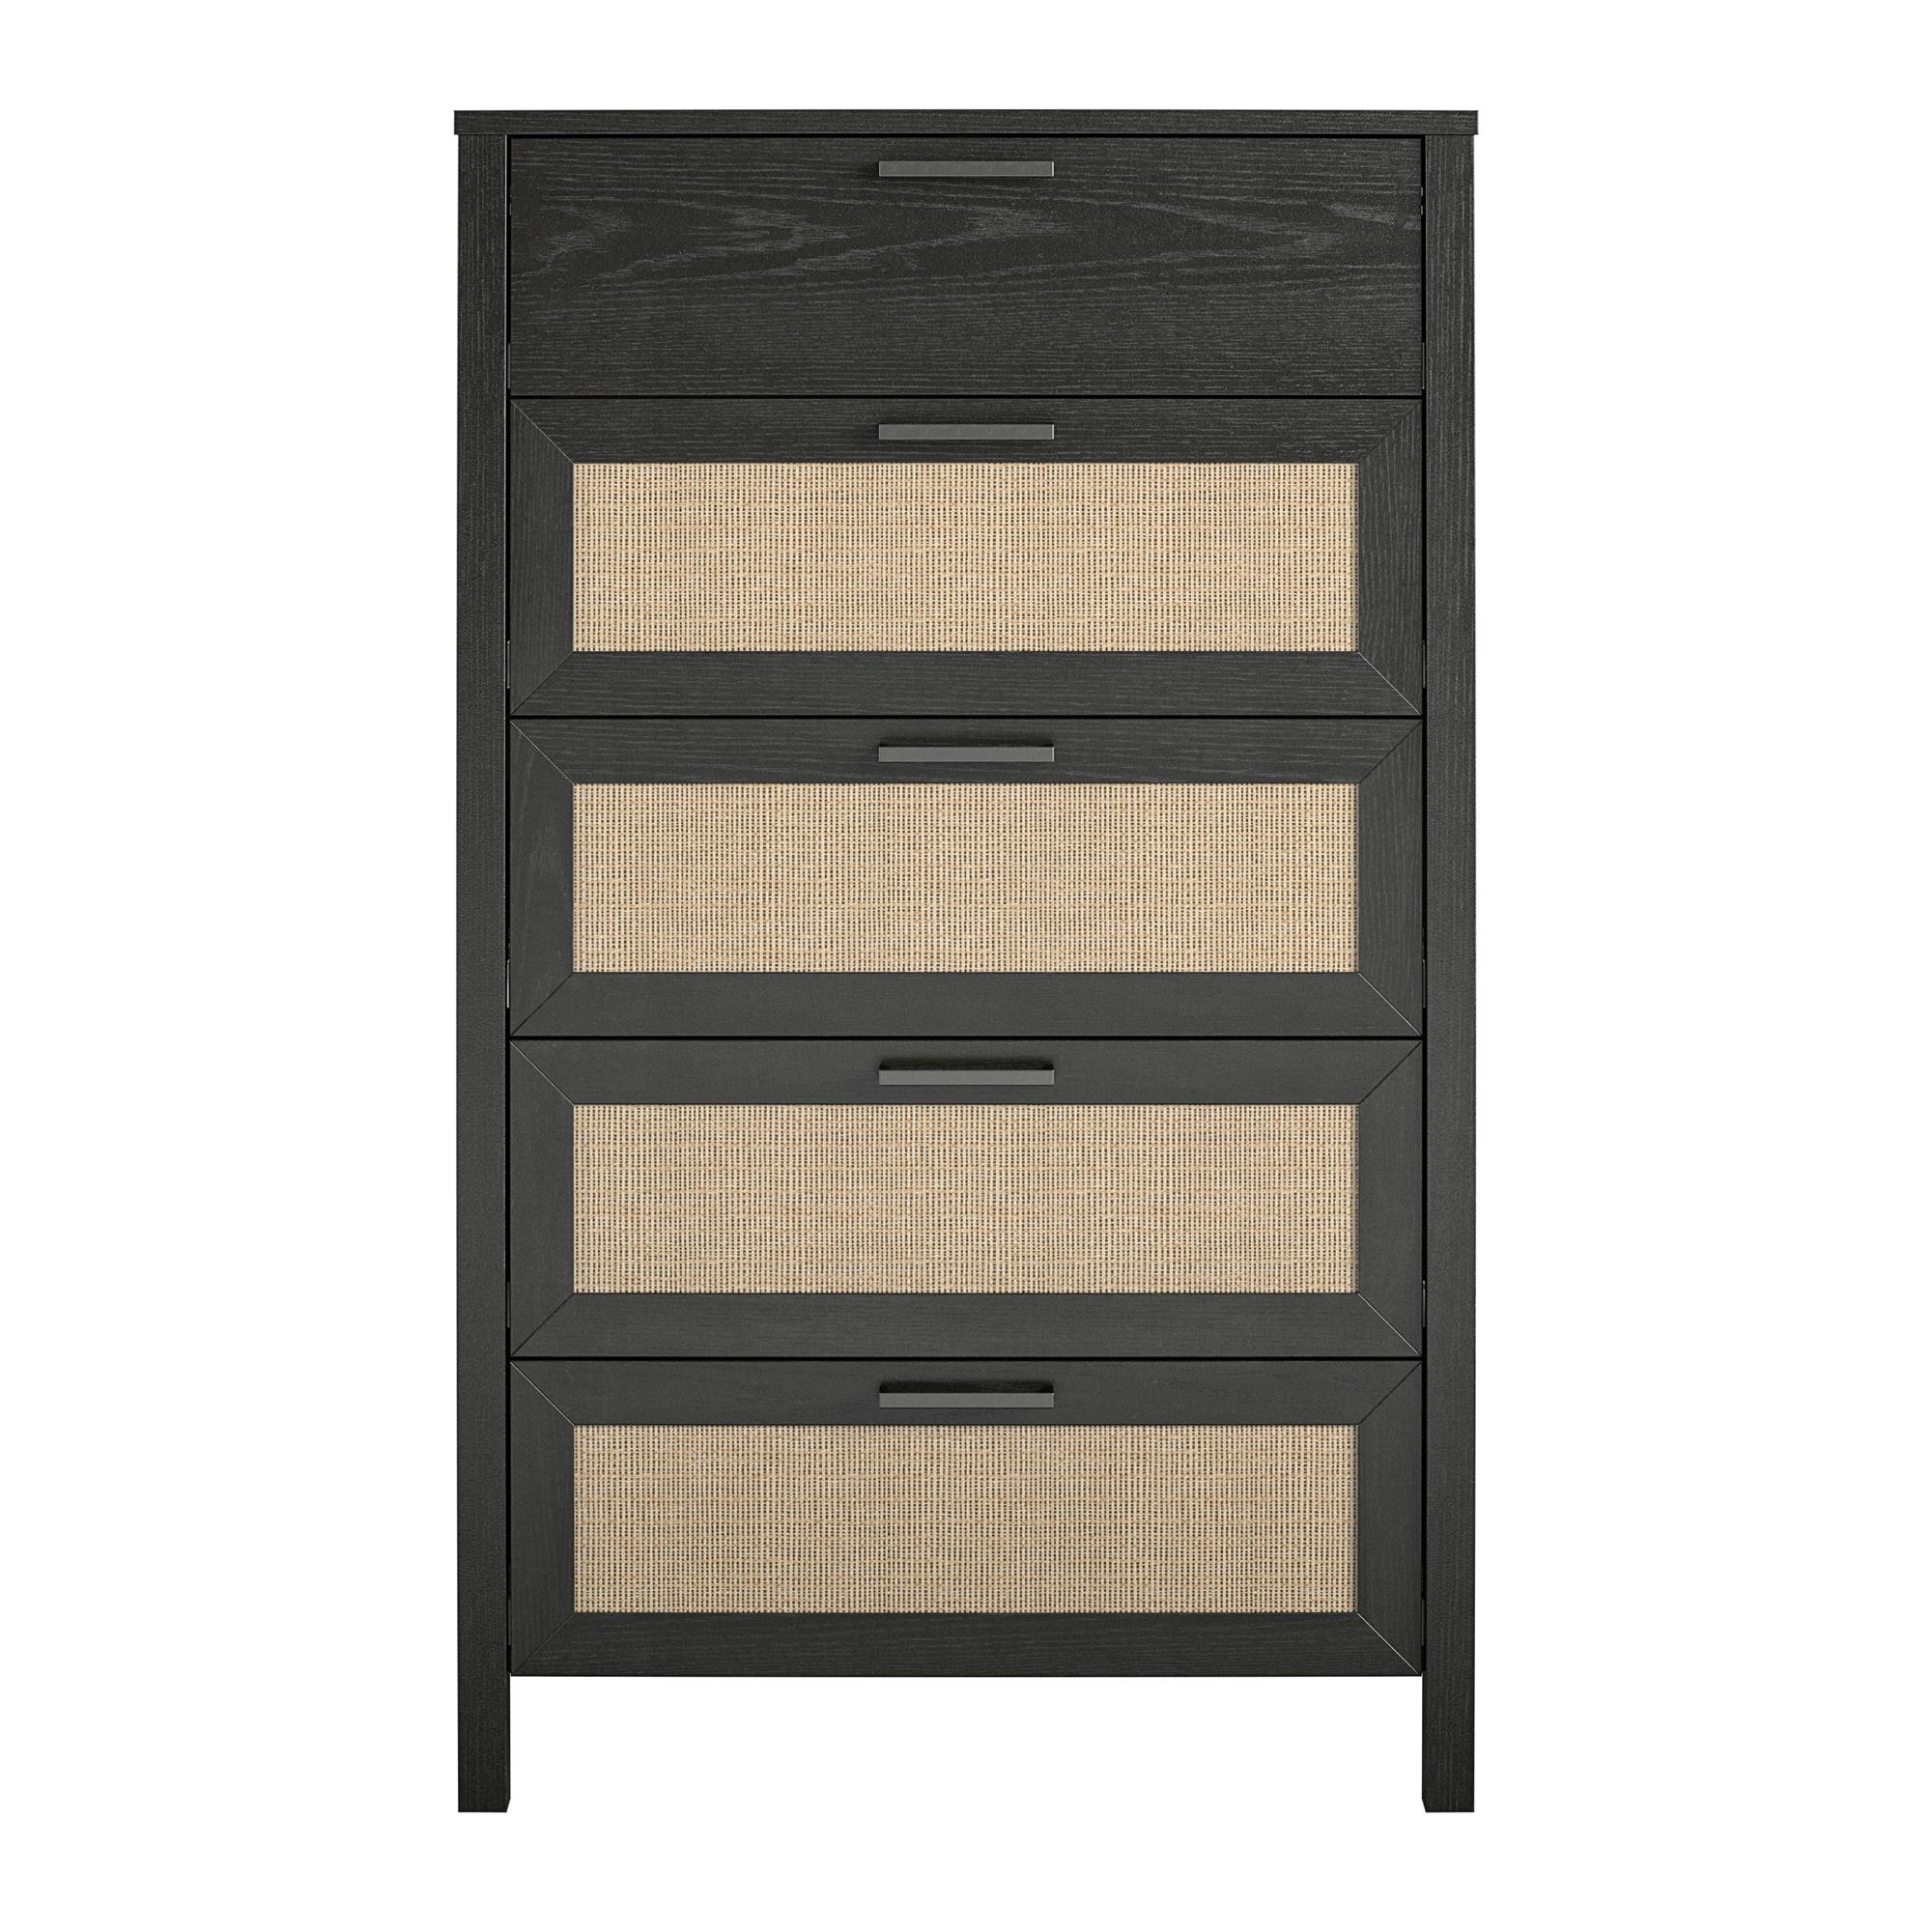 Ameriwood Home Wimberly 5-Drawer Dresser, Black Oak with Faux Rattan - image 3 of 14